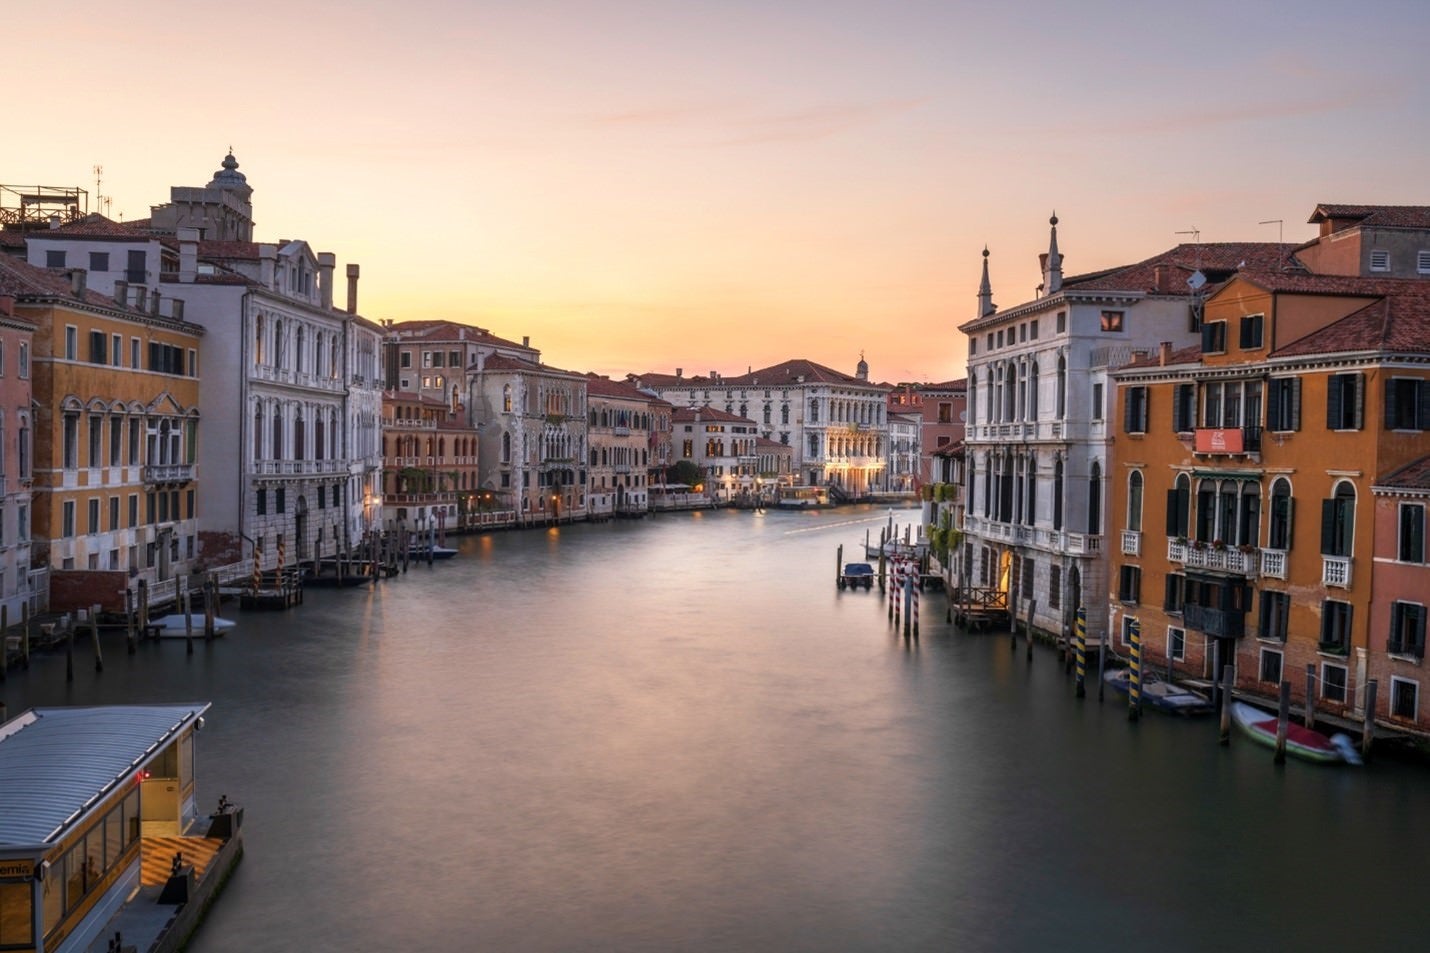 “Grand Canal bathed in the warm embrace of sunset in Venice, Italy.” Photo by Raj Bose. Sony Alpha 7R V. Sony 16-35mm f/2.8 G Master. 15-sec., f/6.3, ISO 80